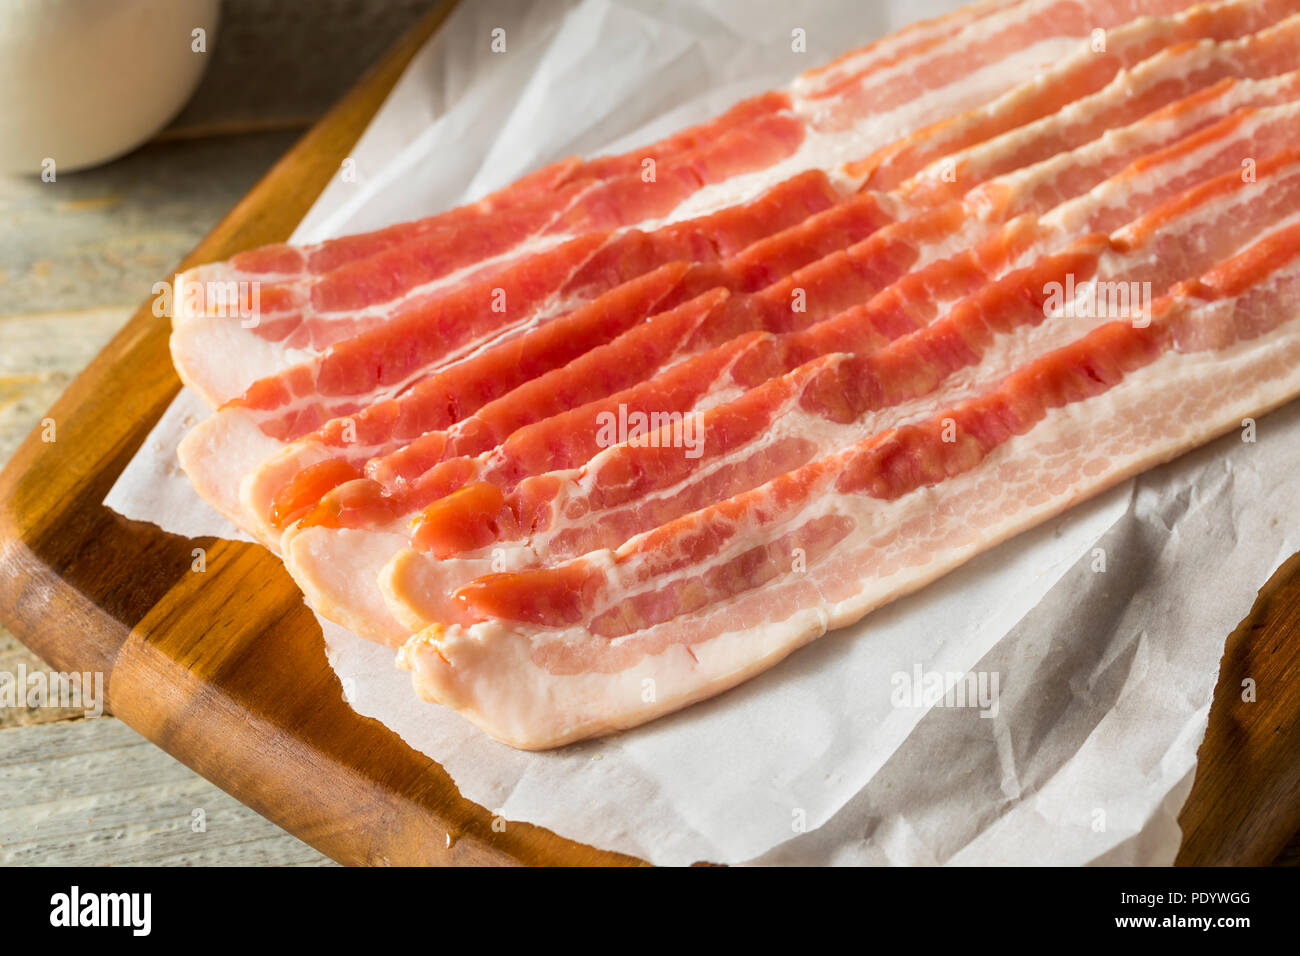 Raw Grass fed Bacon Strips Ready to Cook Stock Photo